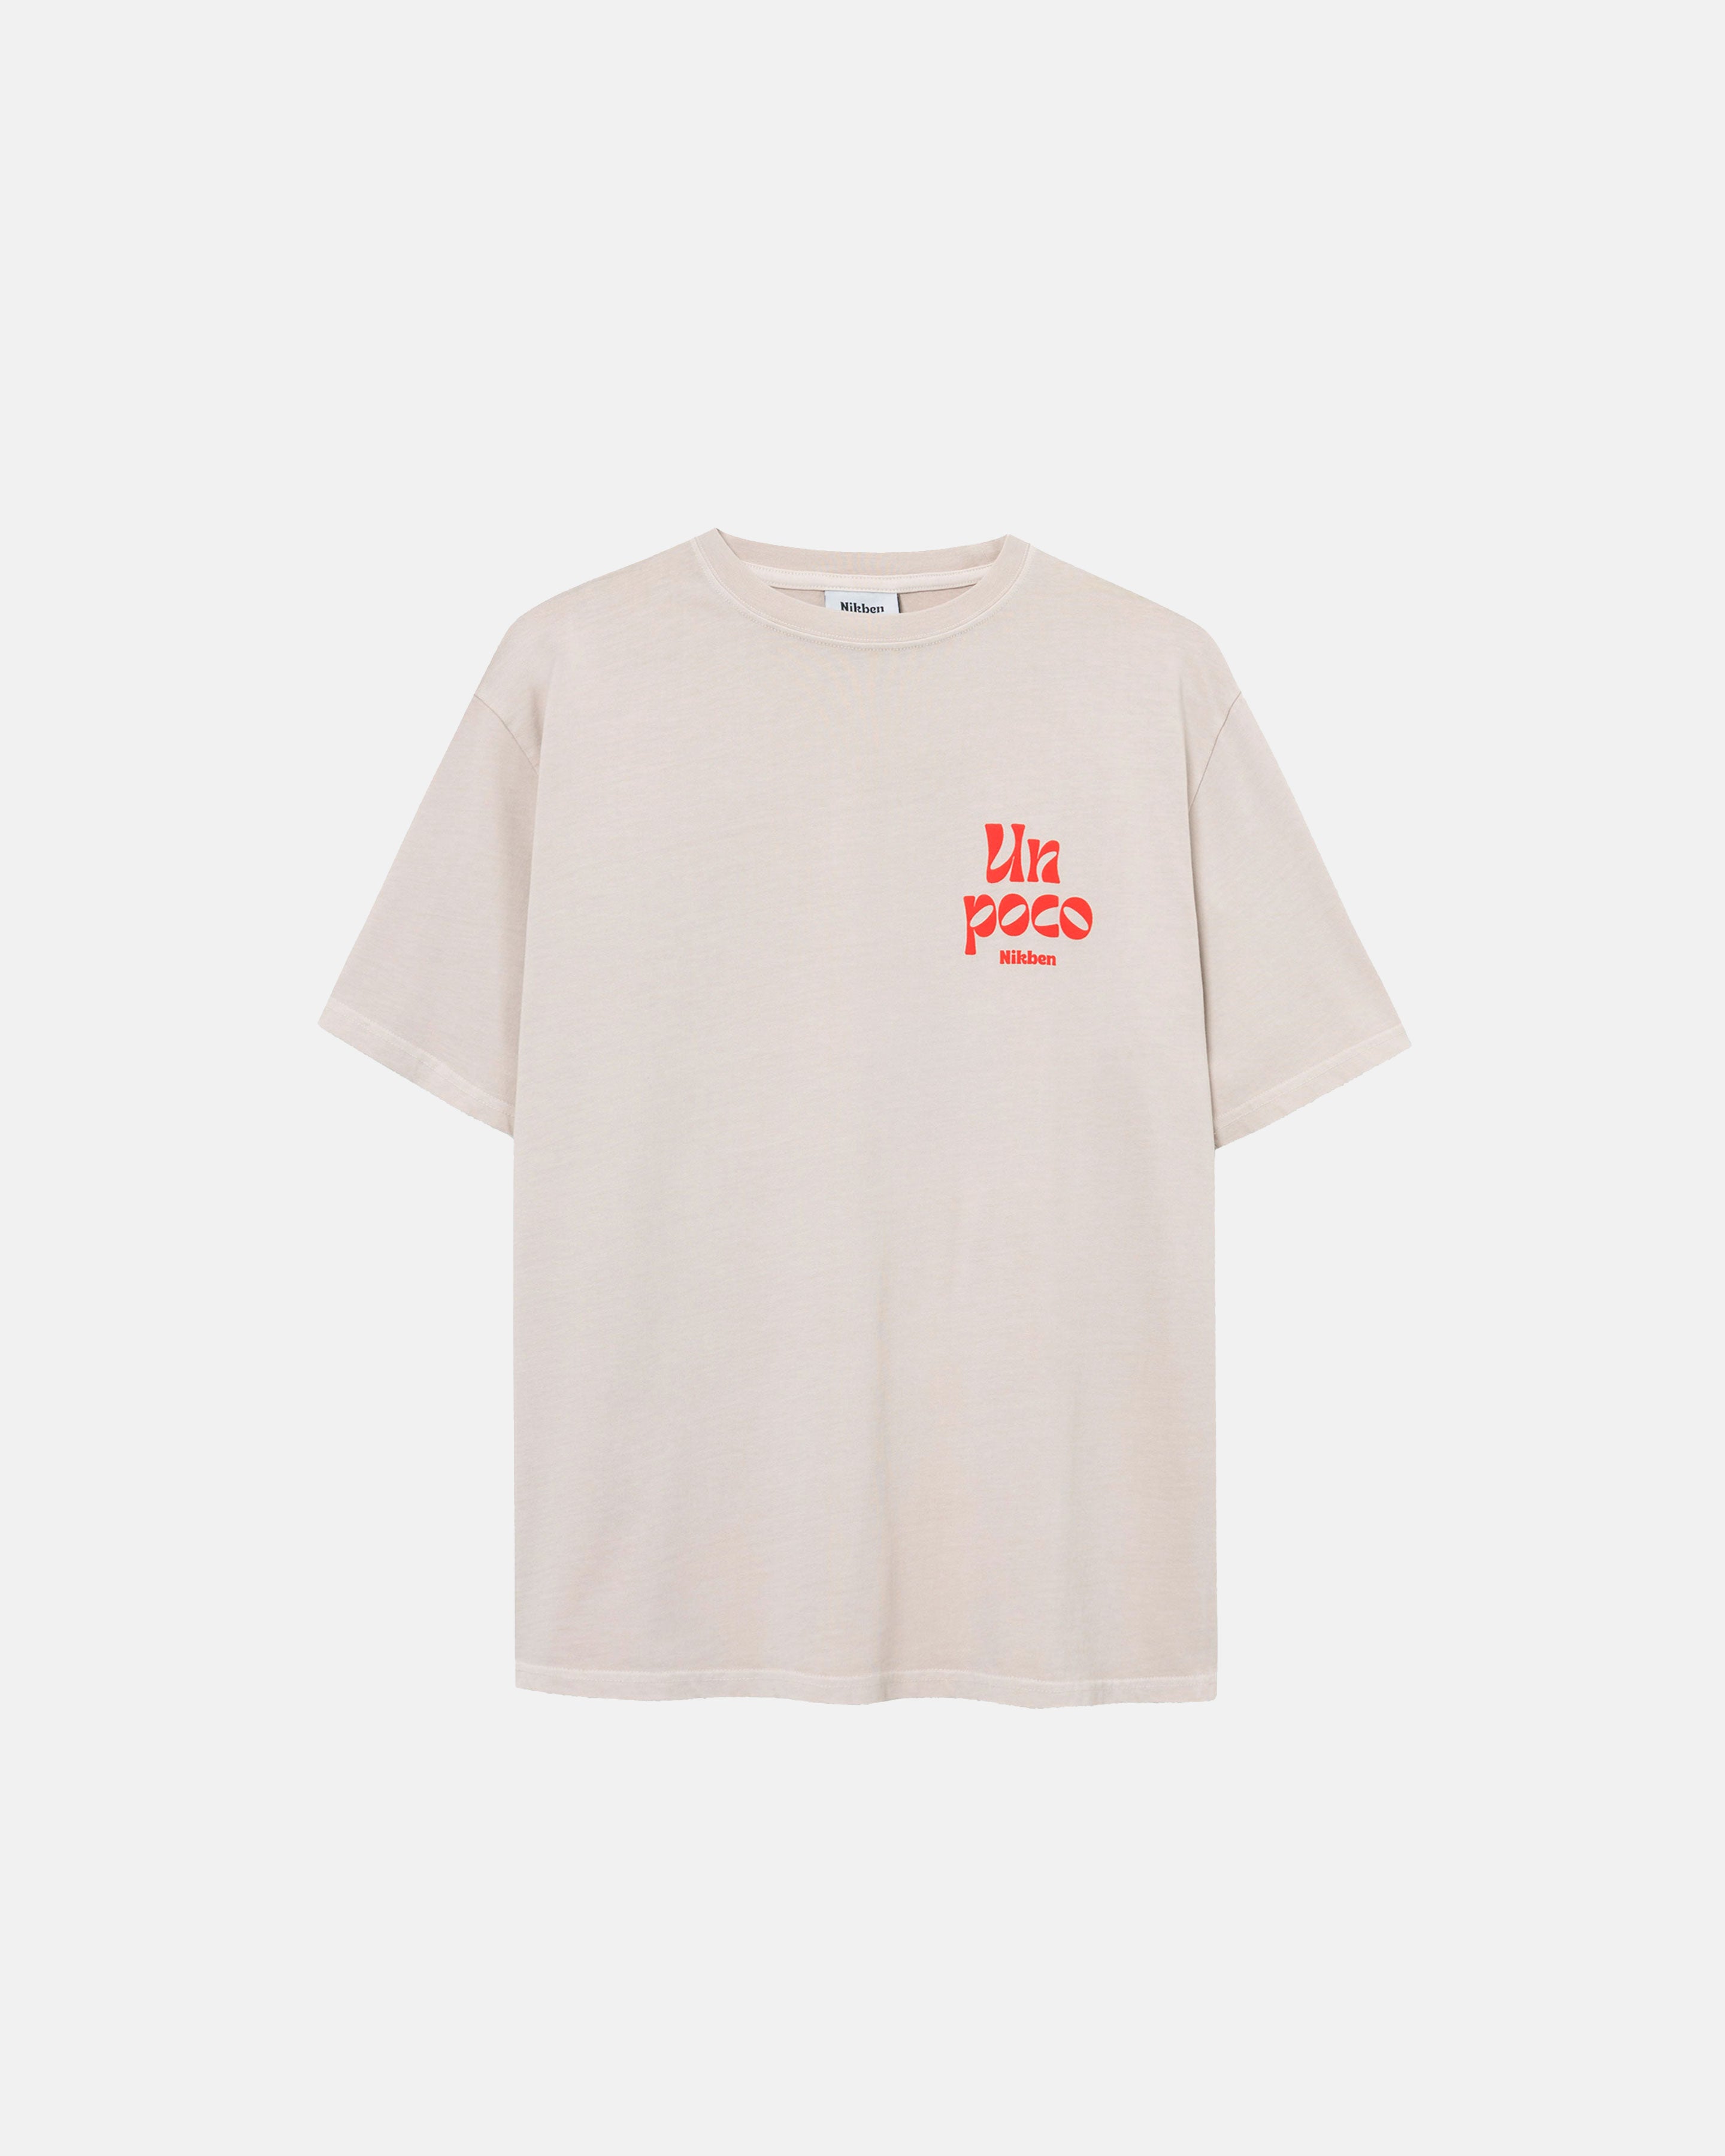 Cream colored t-shirt with red logo on chest.